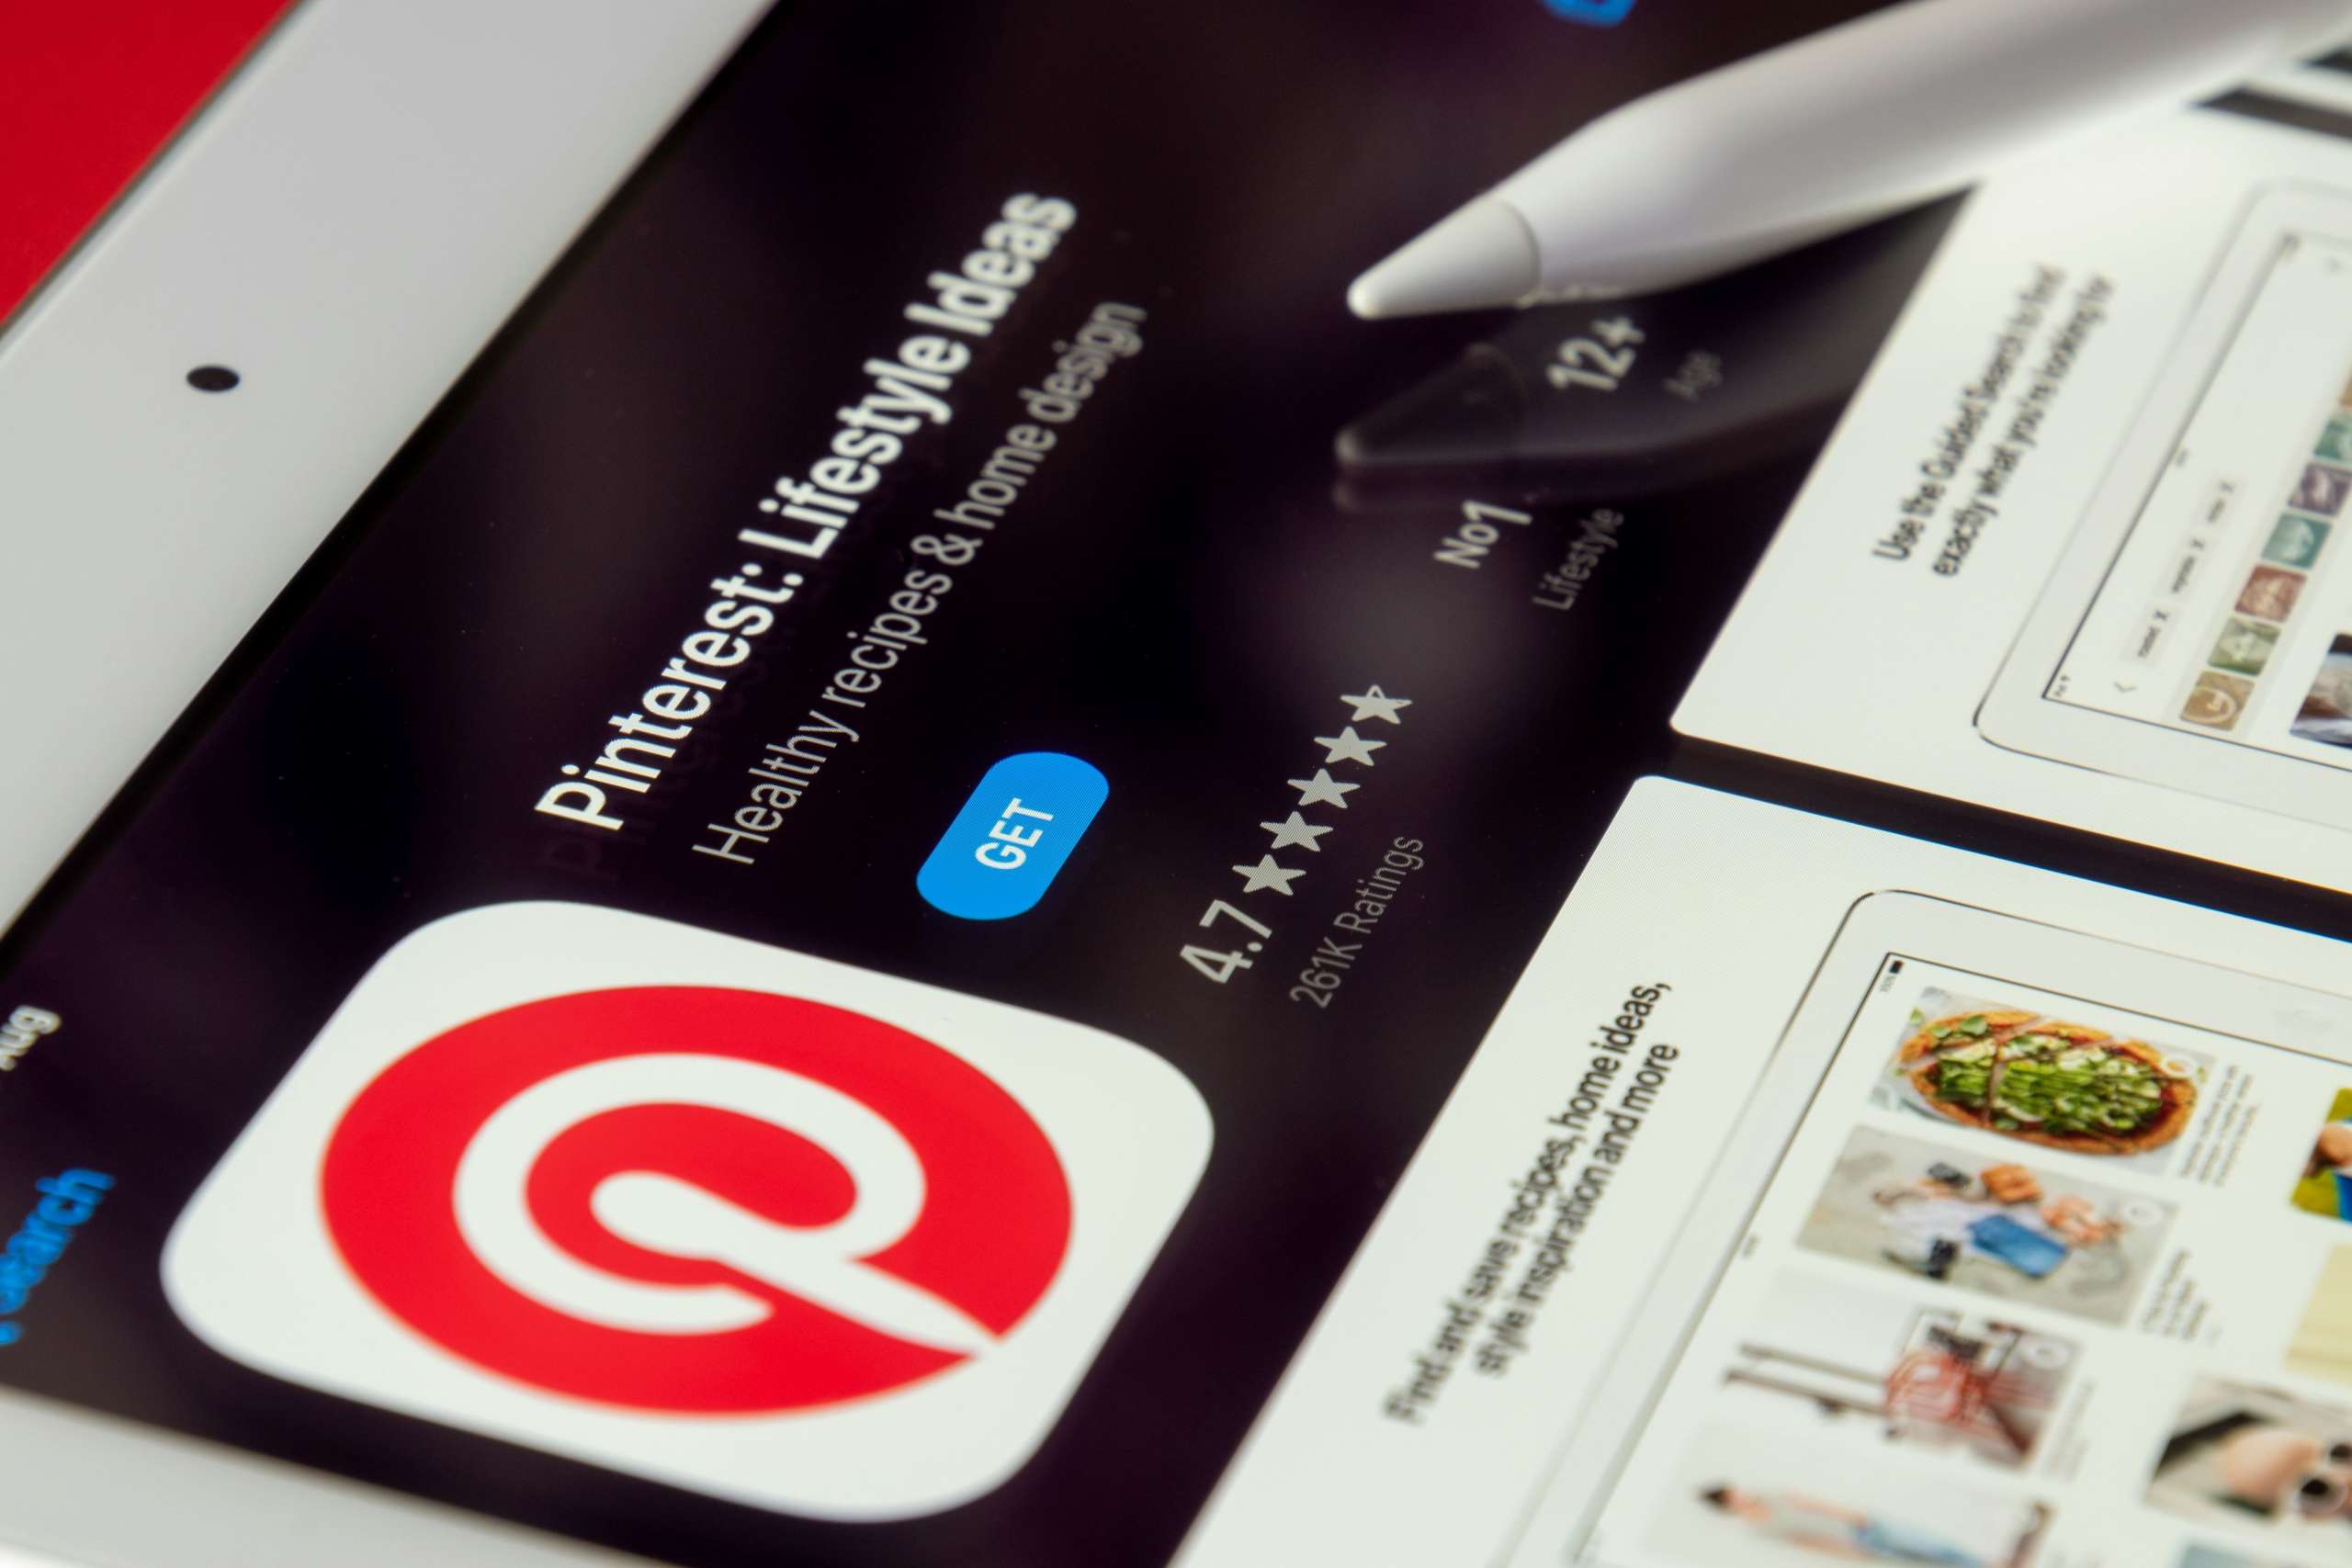 how to use pinterest for marketing